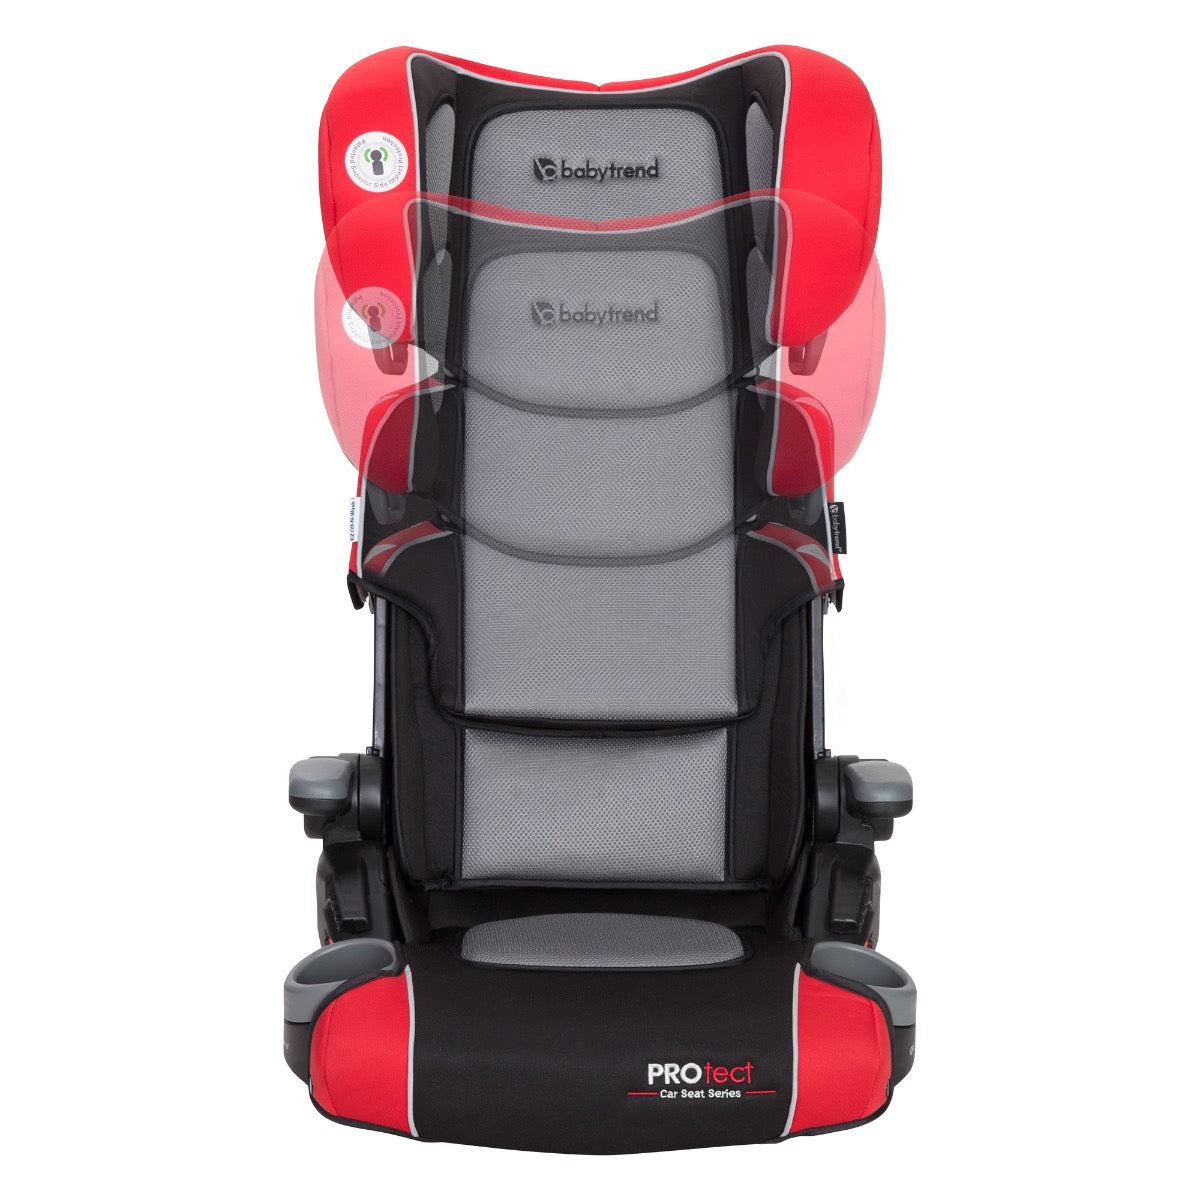 Booster Car Seats – Baby Grand